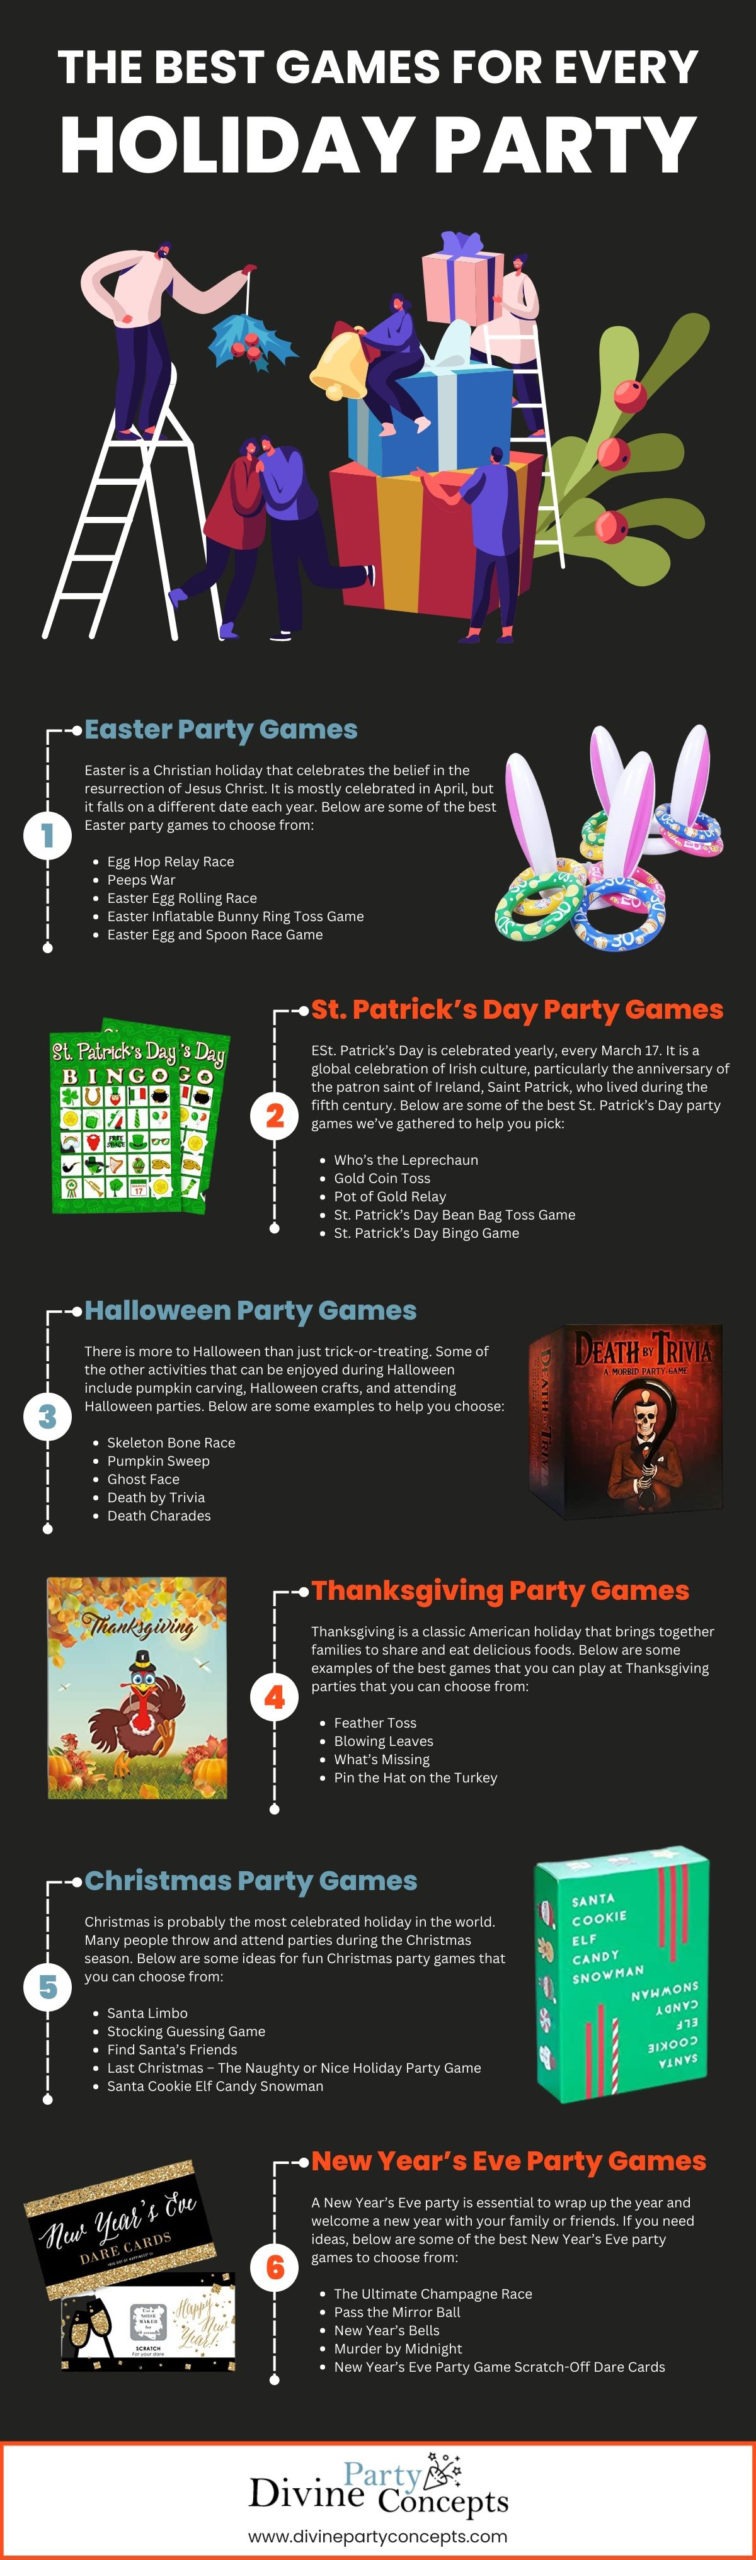 The-Best-Games-for-Every-Holiday-Party